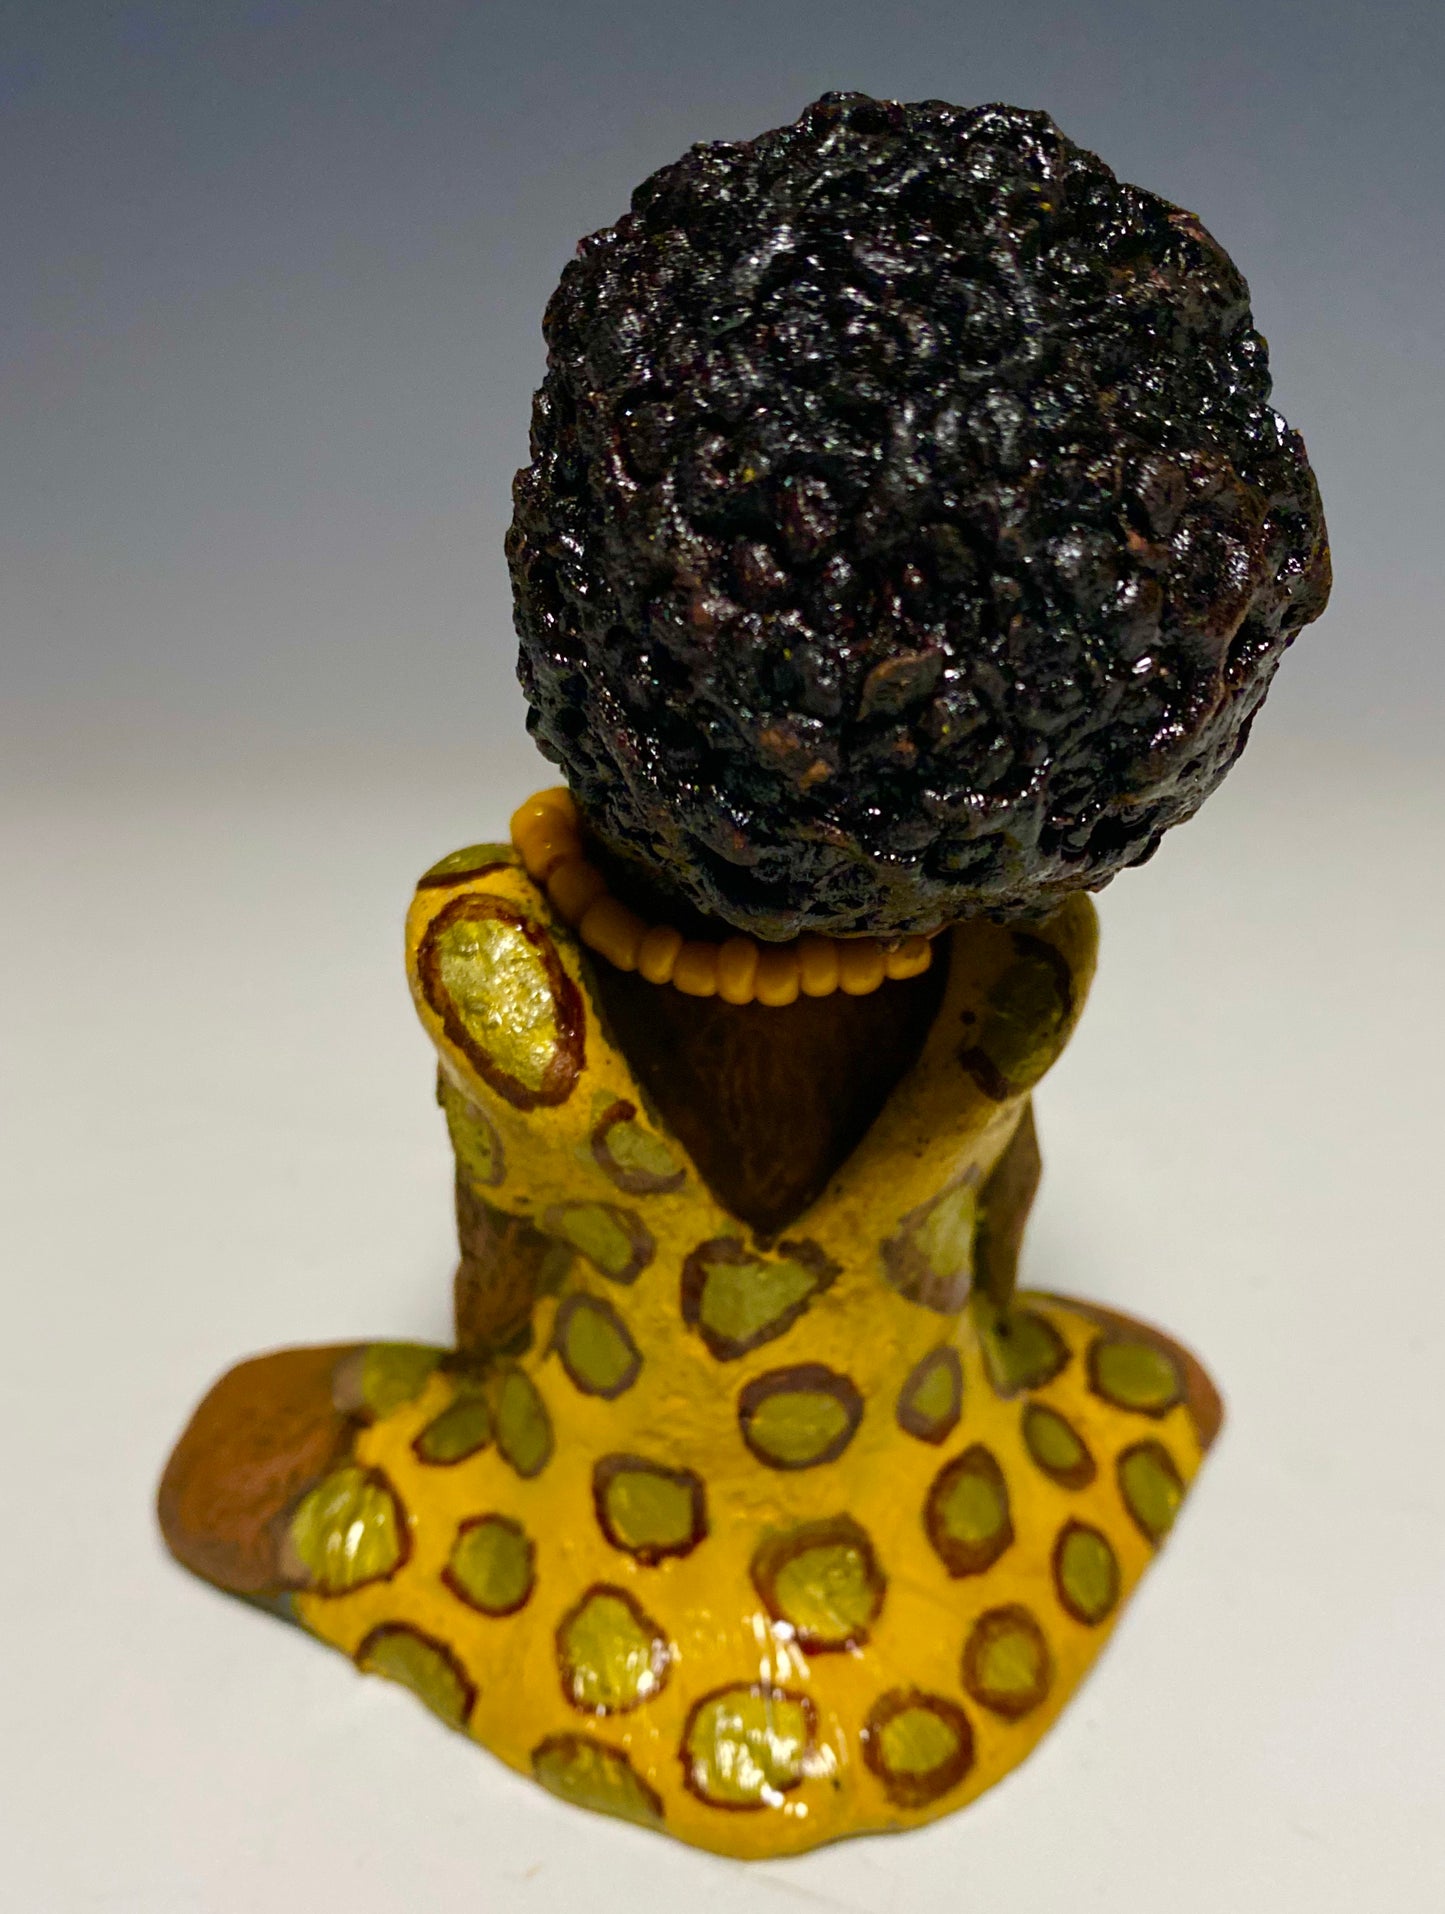 Meet Shelia! Shelia stands" 5 x 4" x 3" and weighs 11 ozs. She wears a cute spotted autumn yellow dress with matching beads. She has a lovely honey brown complexion with an awesome black afro.. Her long loving arms rest at her side. With the current situation we All are going through, Shelia will place a smile on your face during this challenging time. 